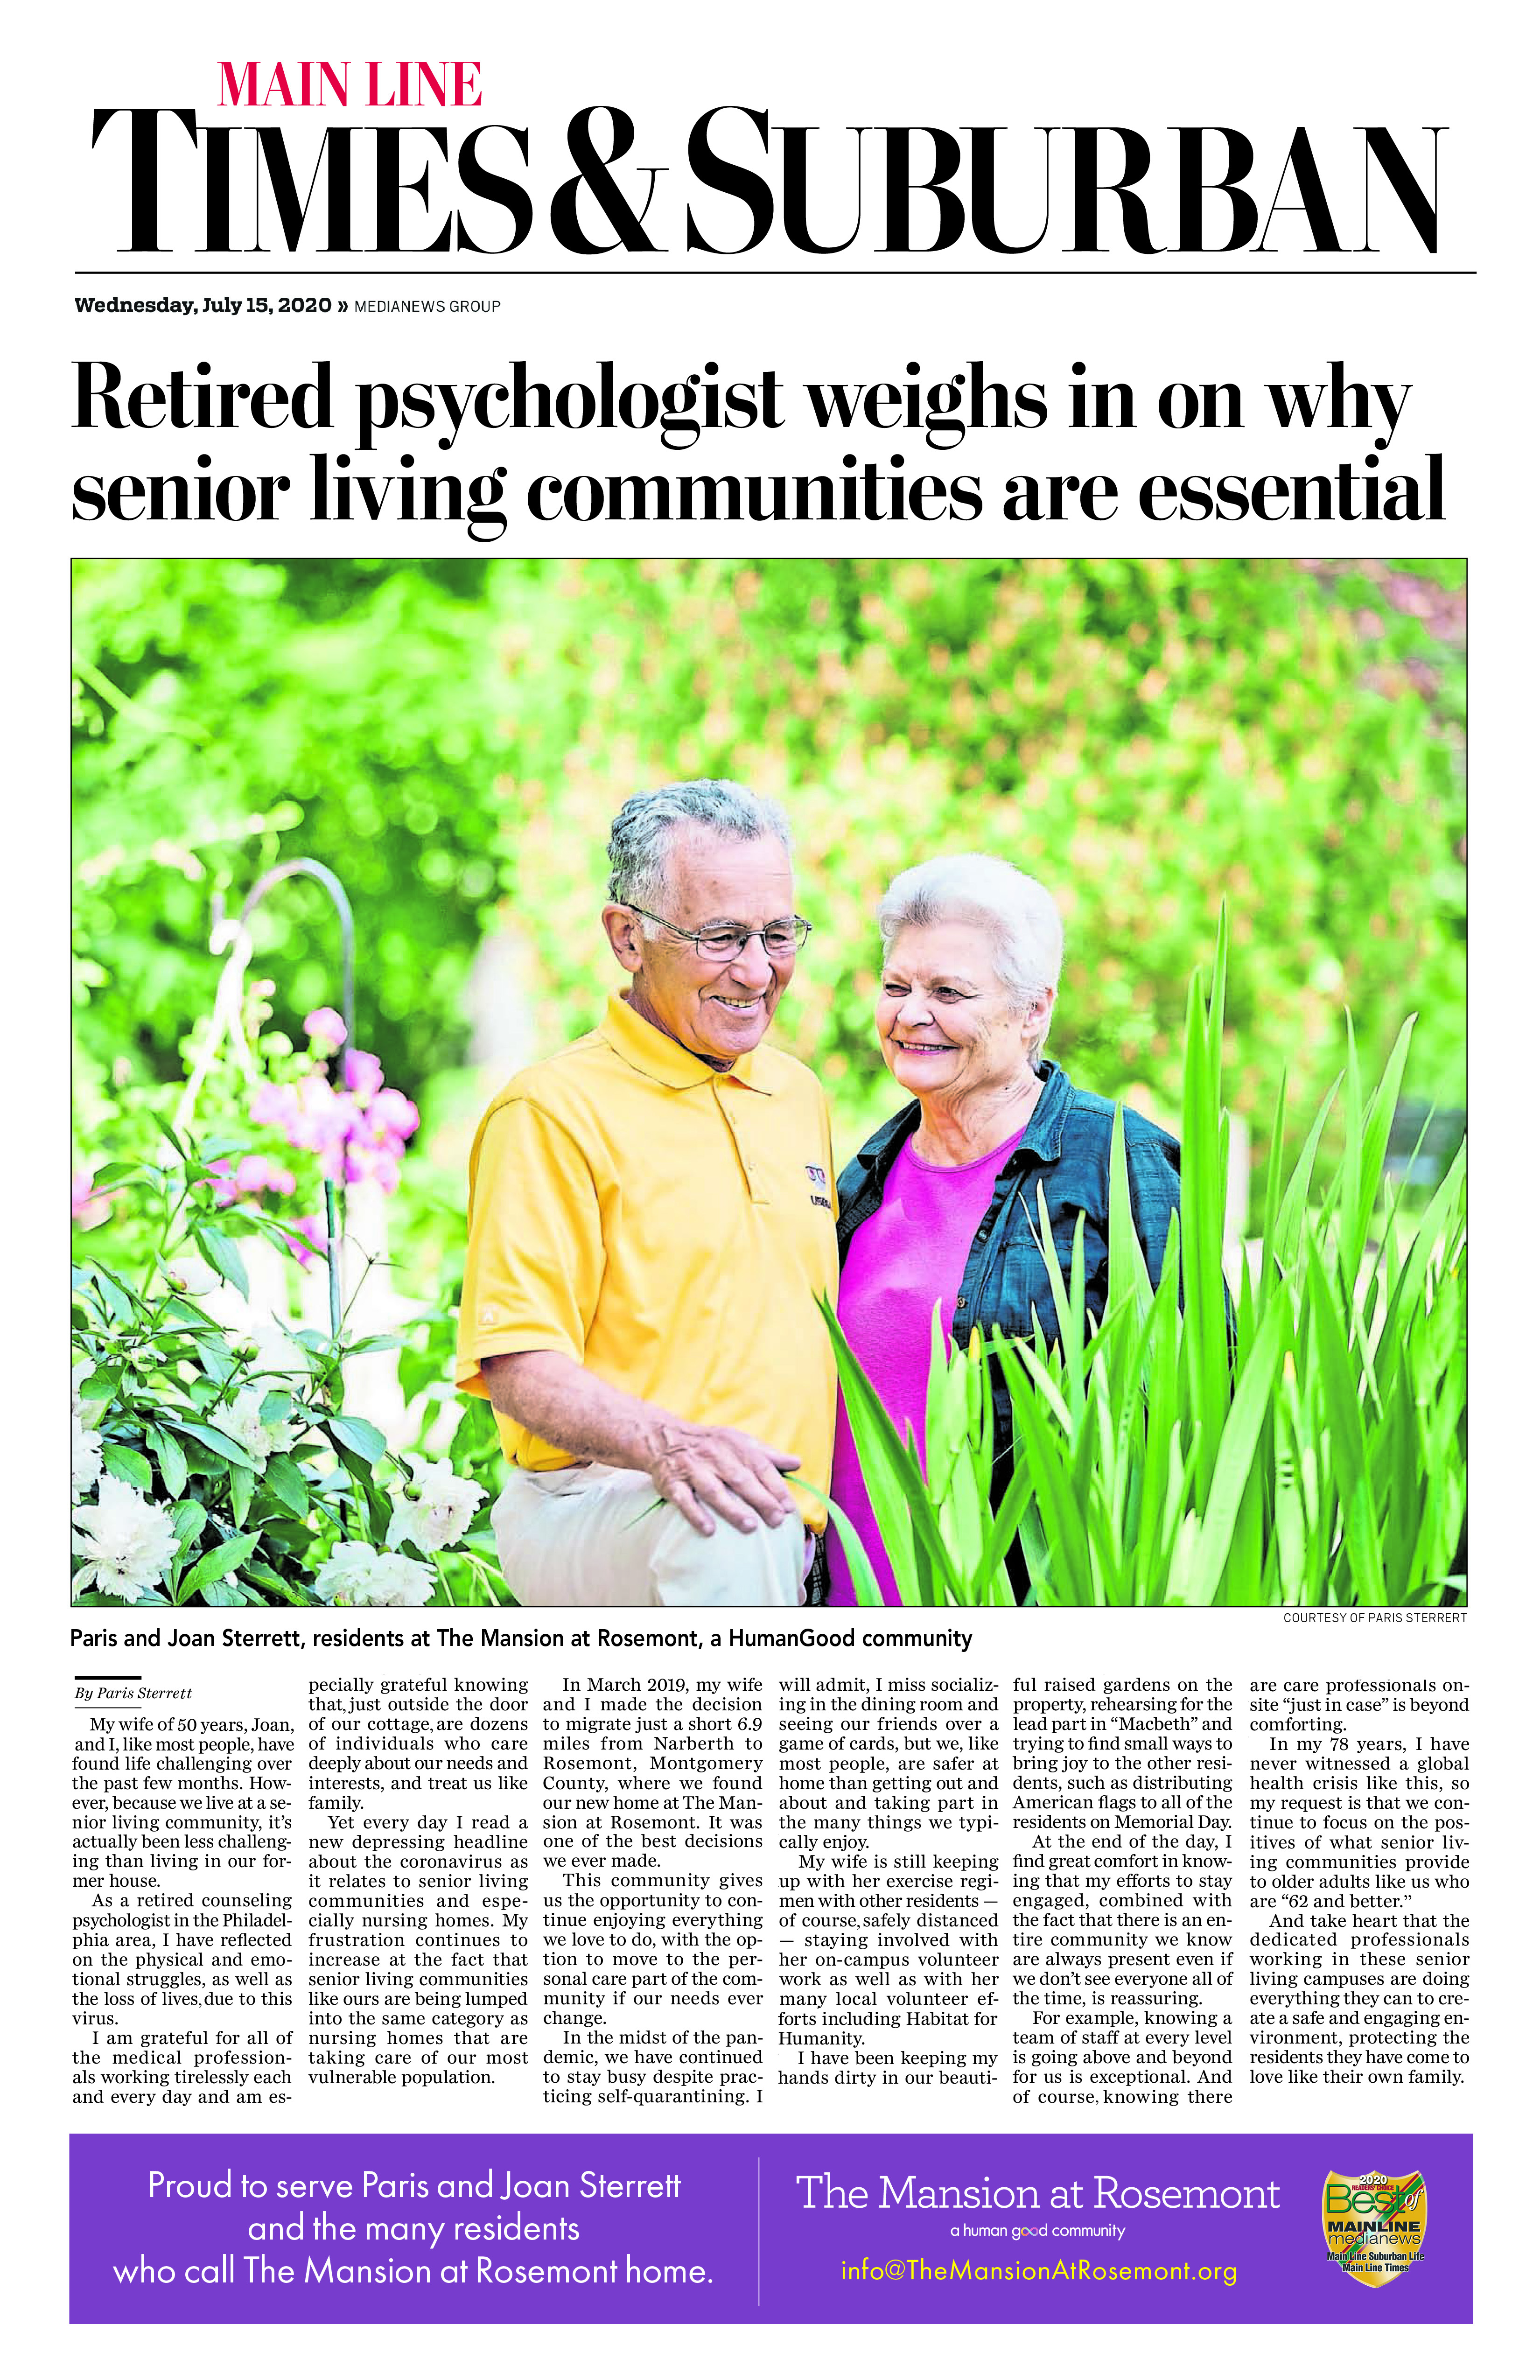 Newspaper article with headline that reads "retired psychologist weighs in on why senior living communities are essential"